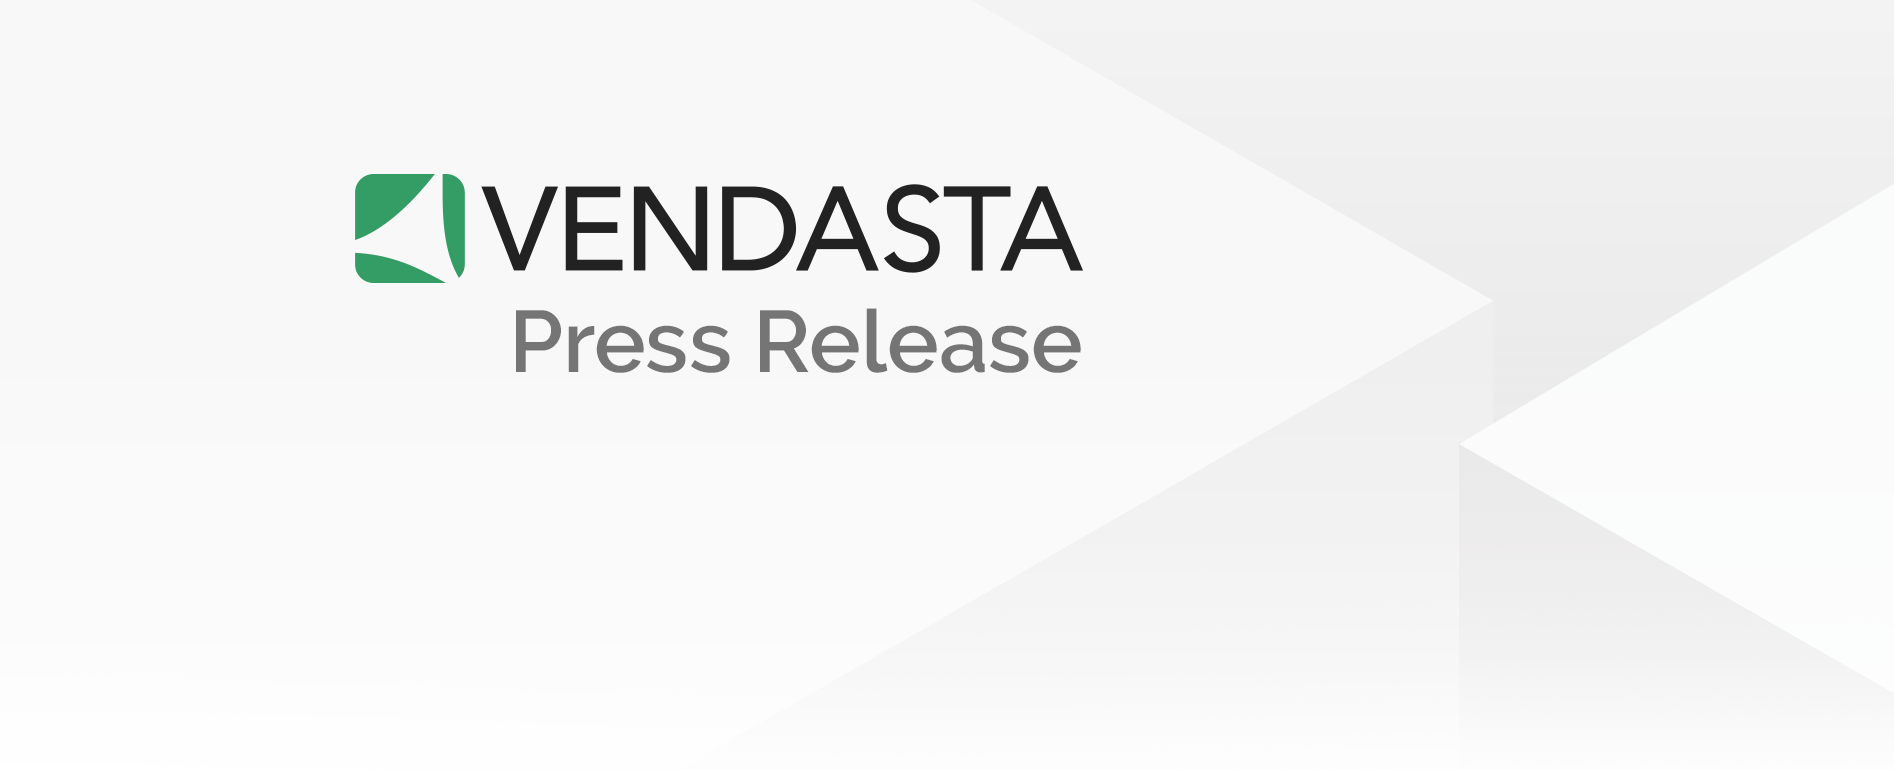 Vendasta named to CIX Top 10 Growth companies